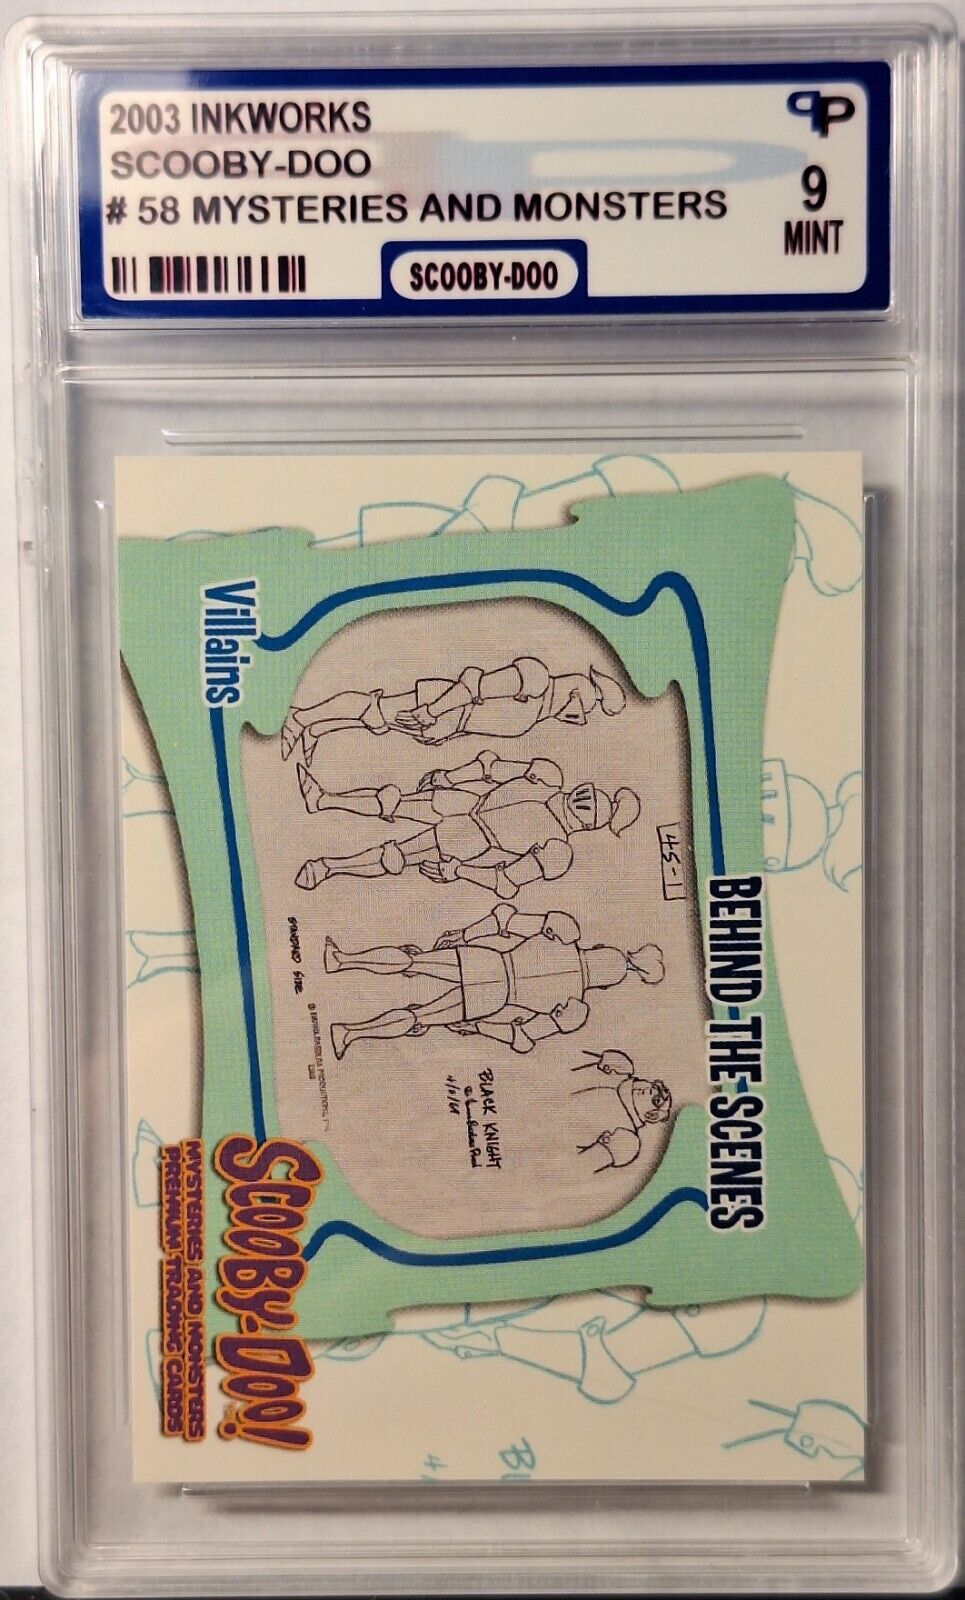 2003 Inkworks #58 Scooby Doo Mysteries And Monsters Character Design - PSA 9